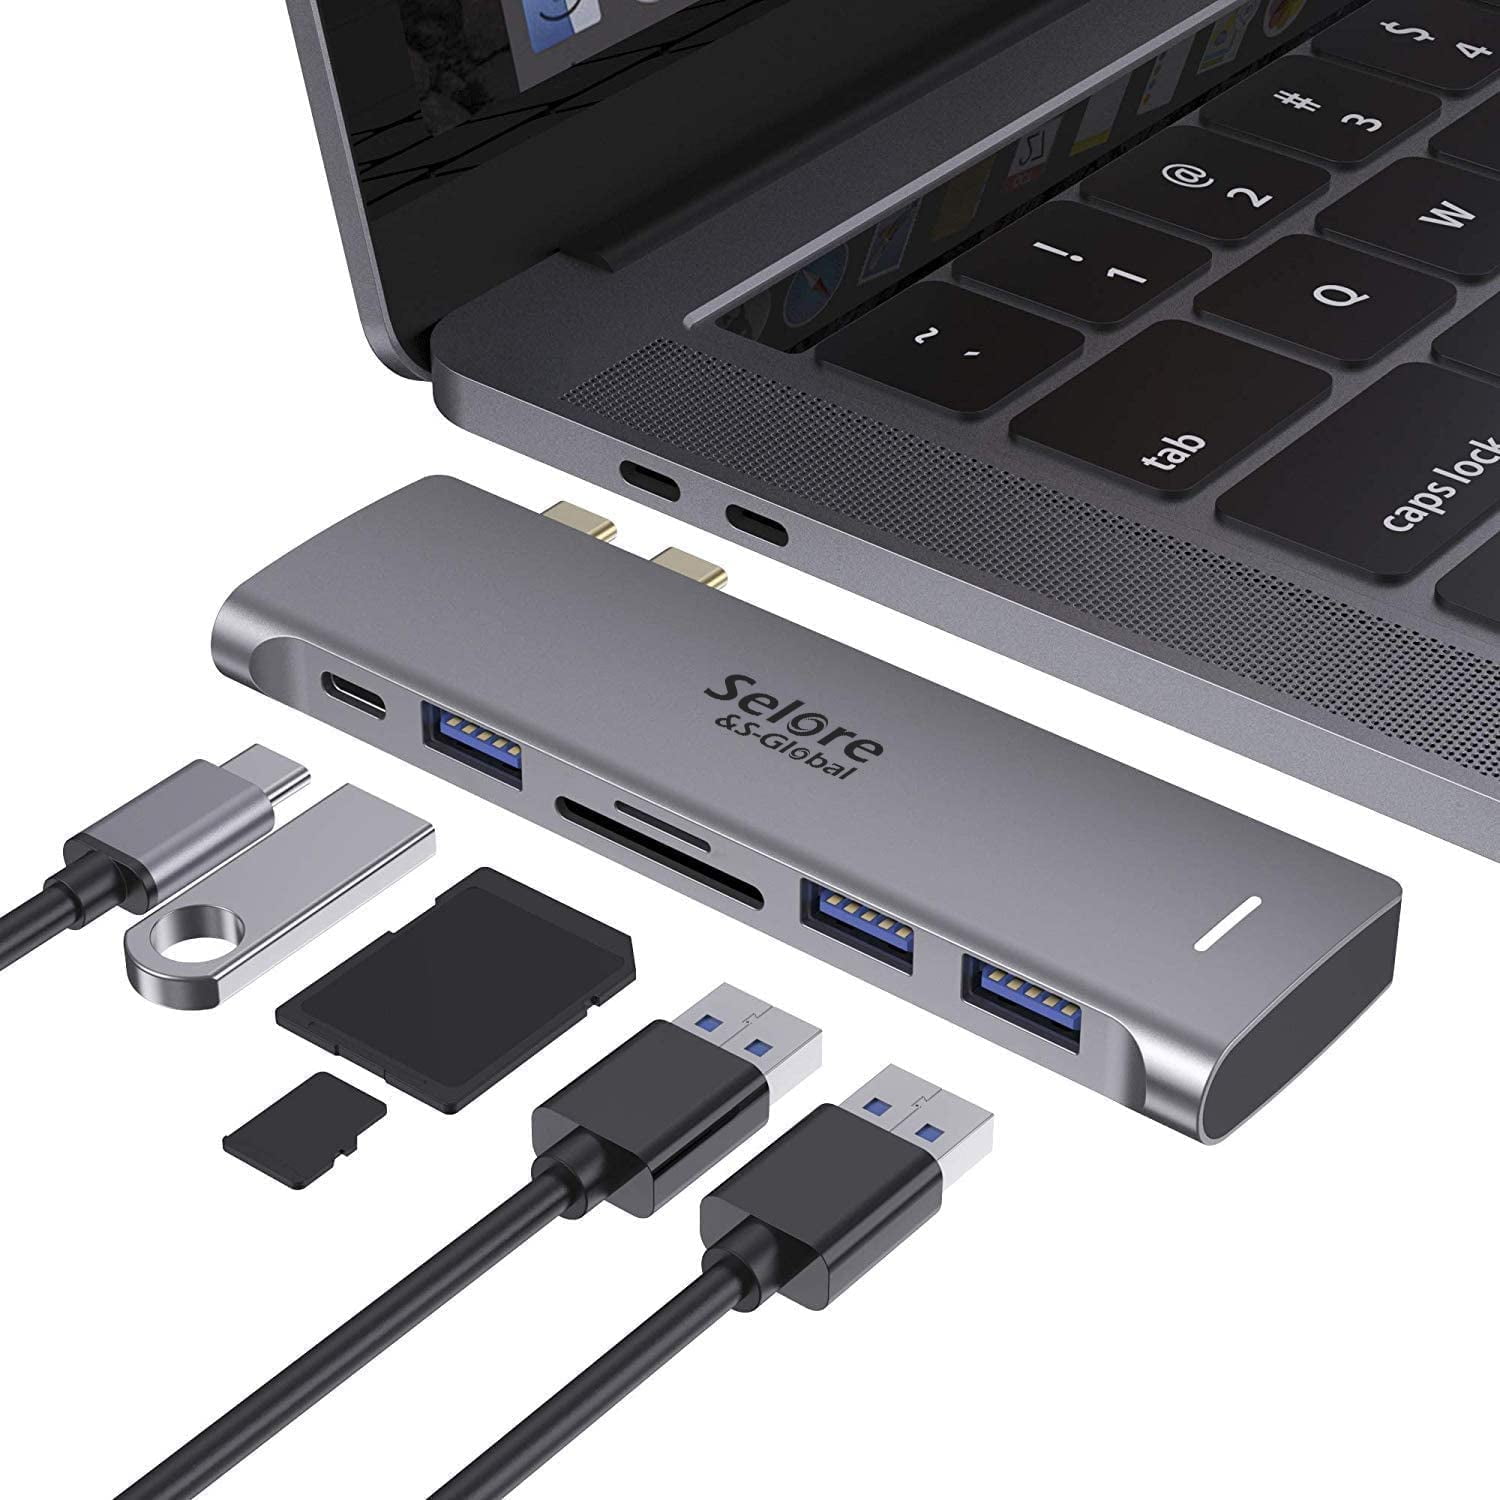 USB C Adapter for MacBook Pro/MacBook Air M1 13" 15" 16", 6 in 1 USB-C Hub MacBook Pro Accessories with USB 3.0 Ports,USB C to SD/TF Card Reader and 100W